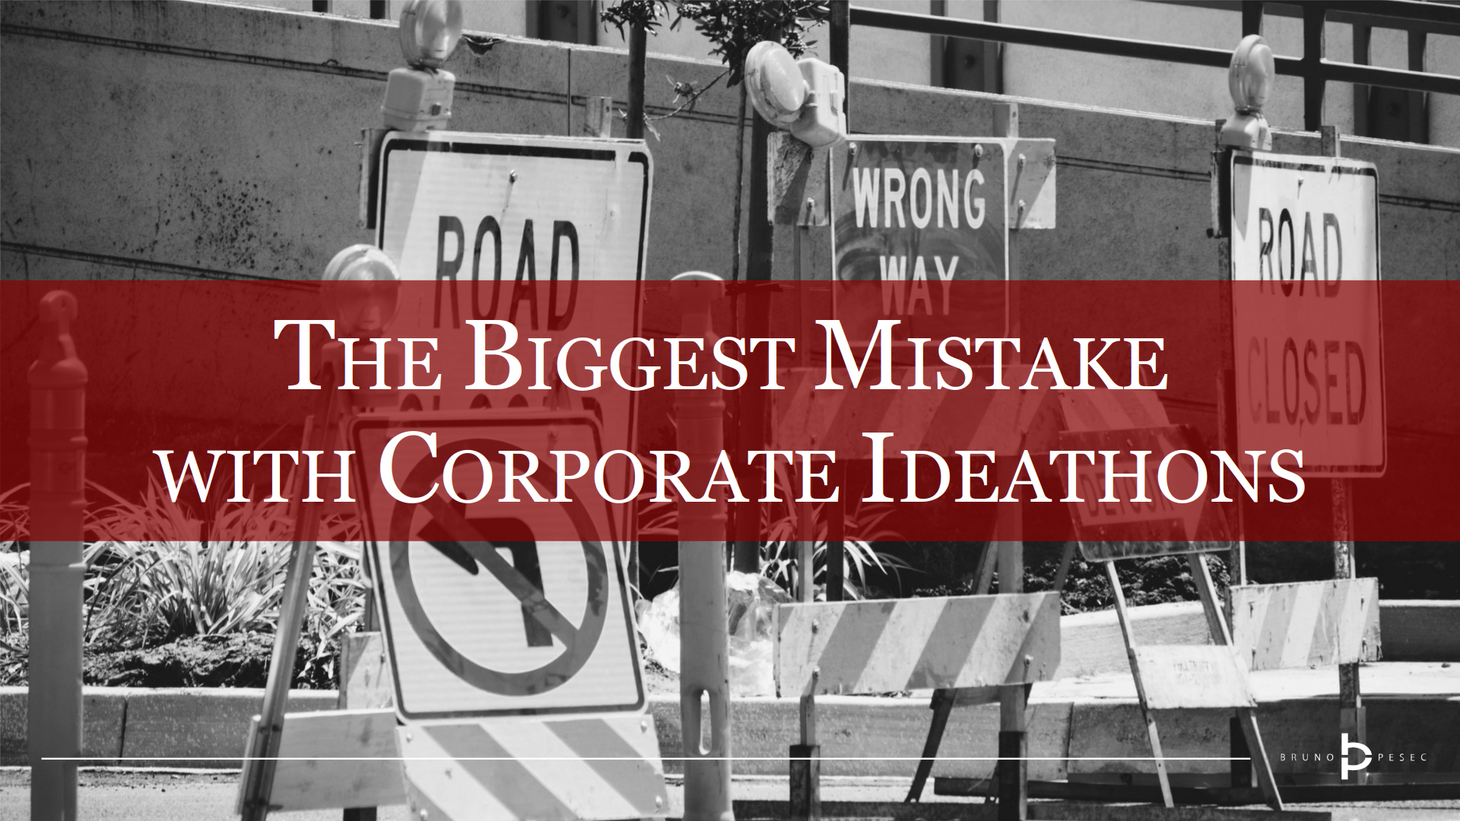 The biggest mistake with corporate ideathons